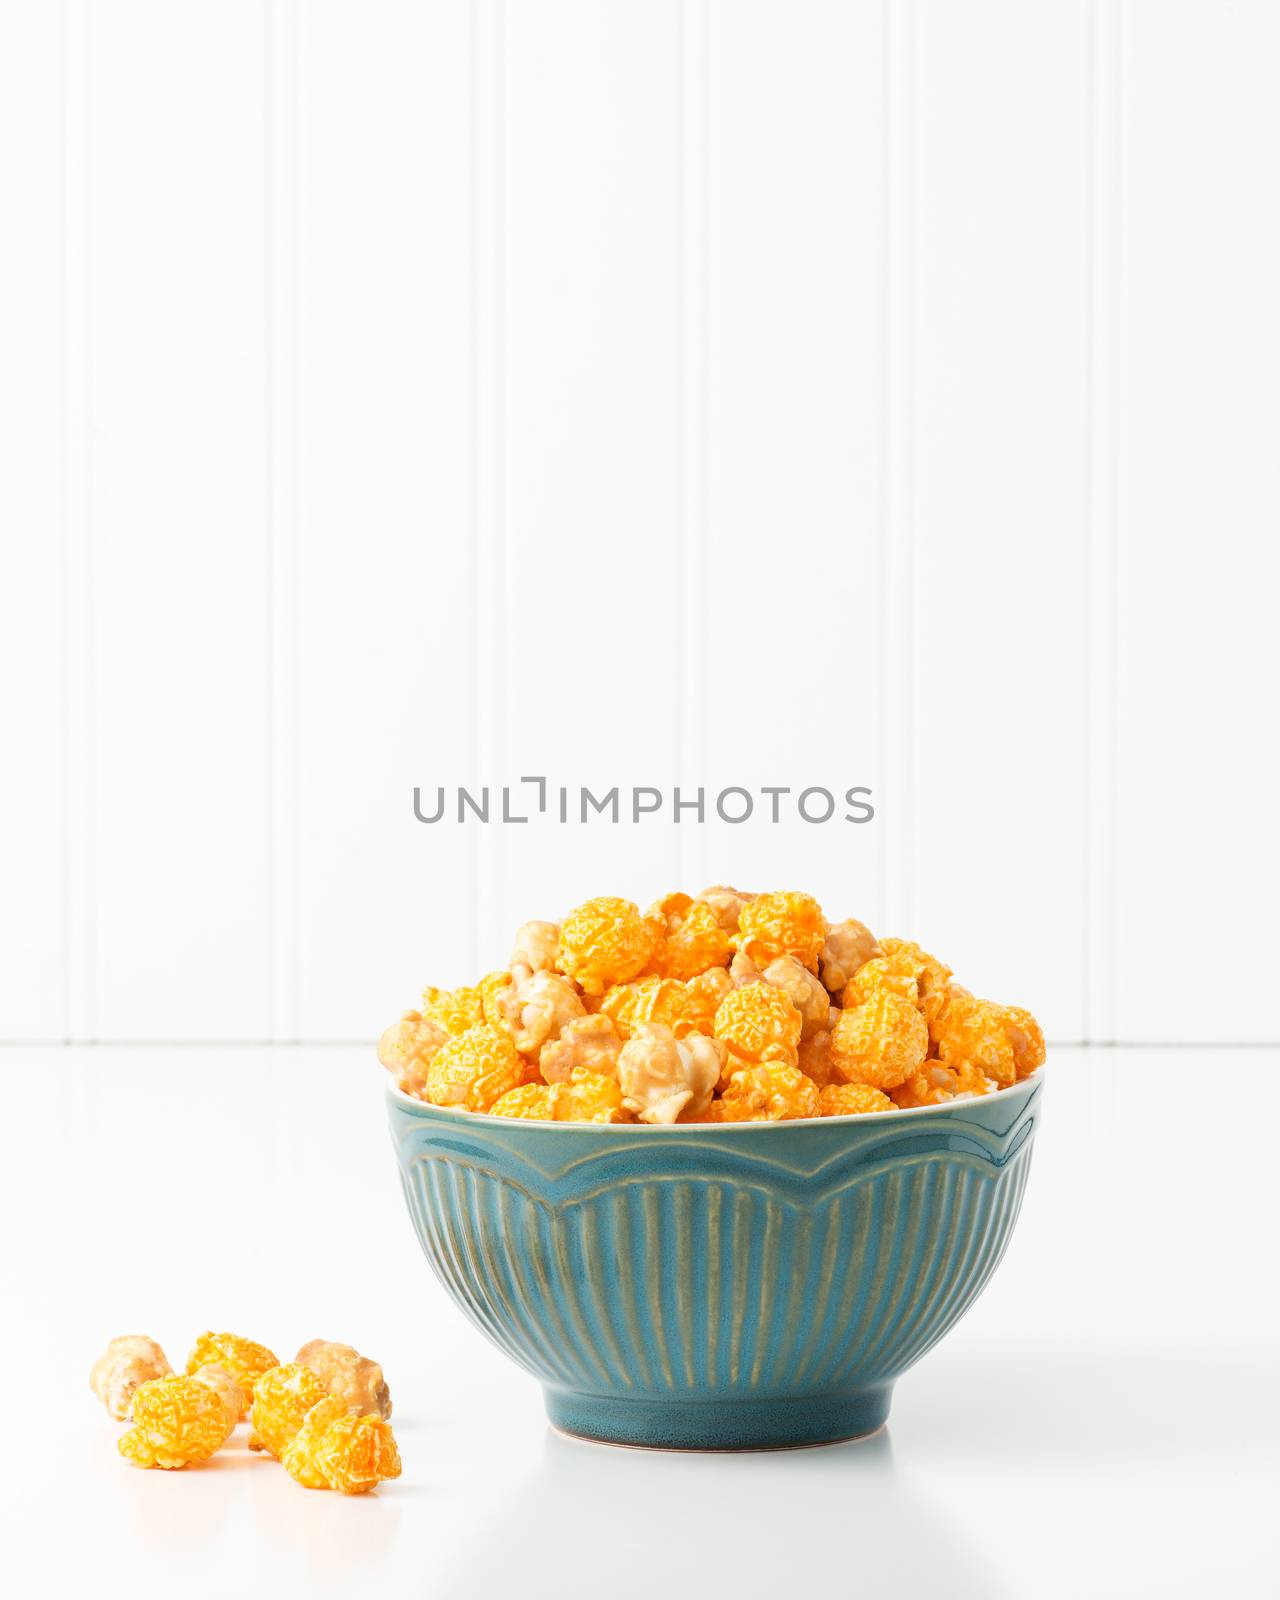 Cheese and caramel popcorn mix known as Chicago mix in a bowl.